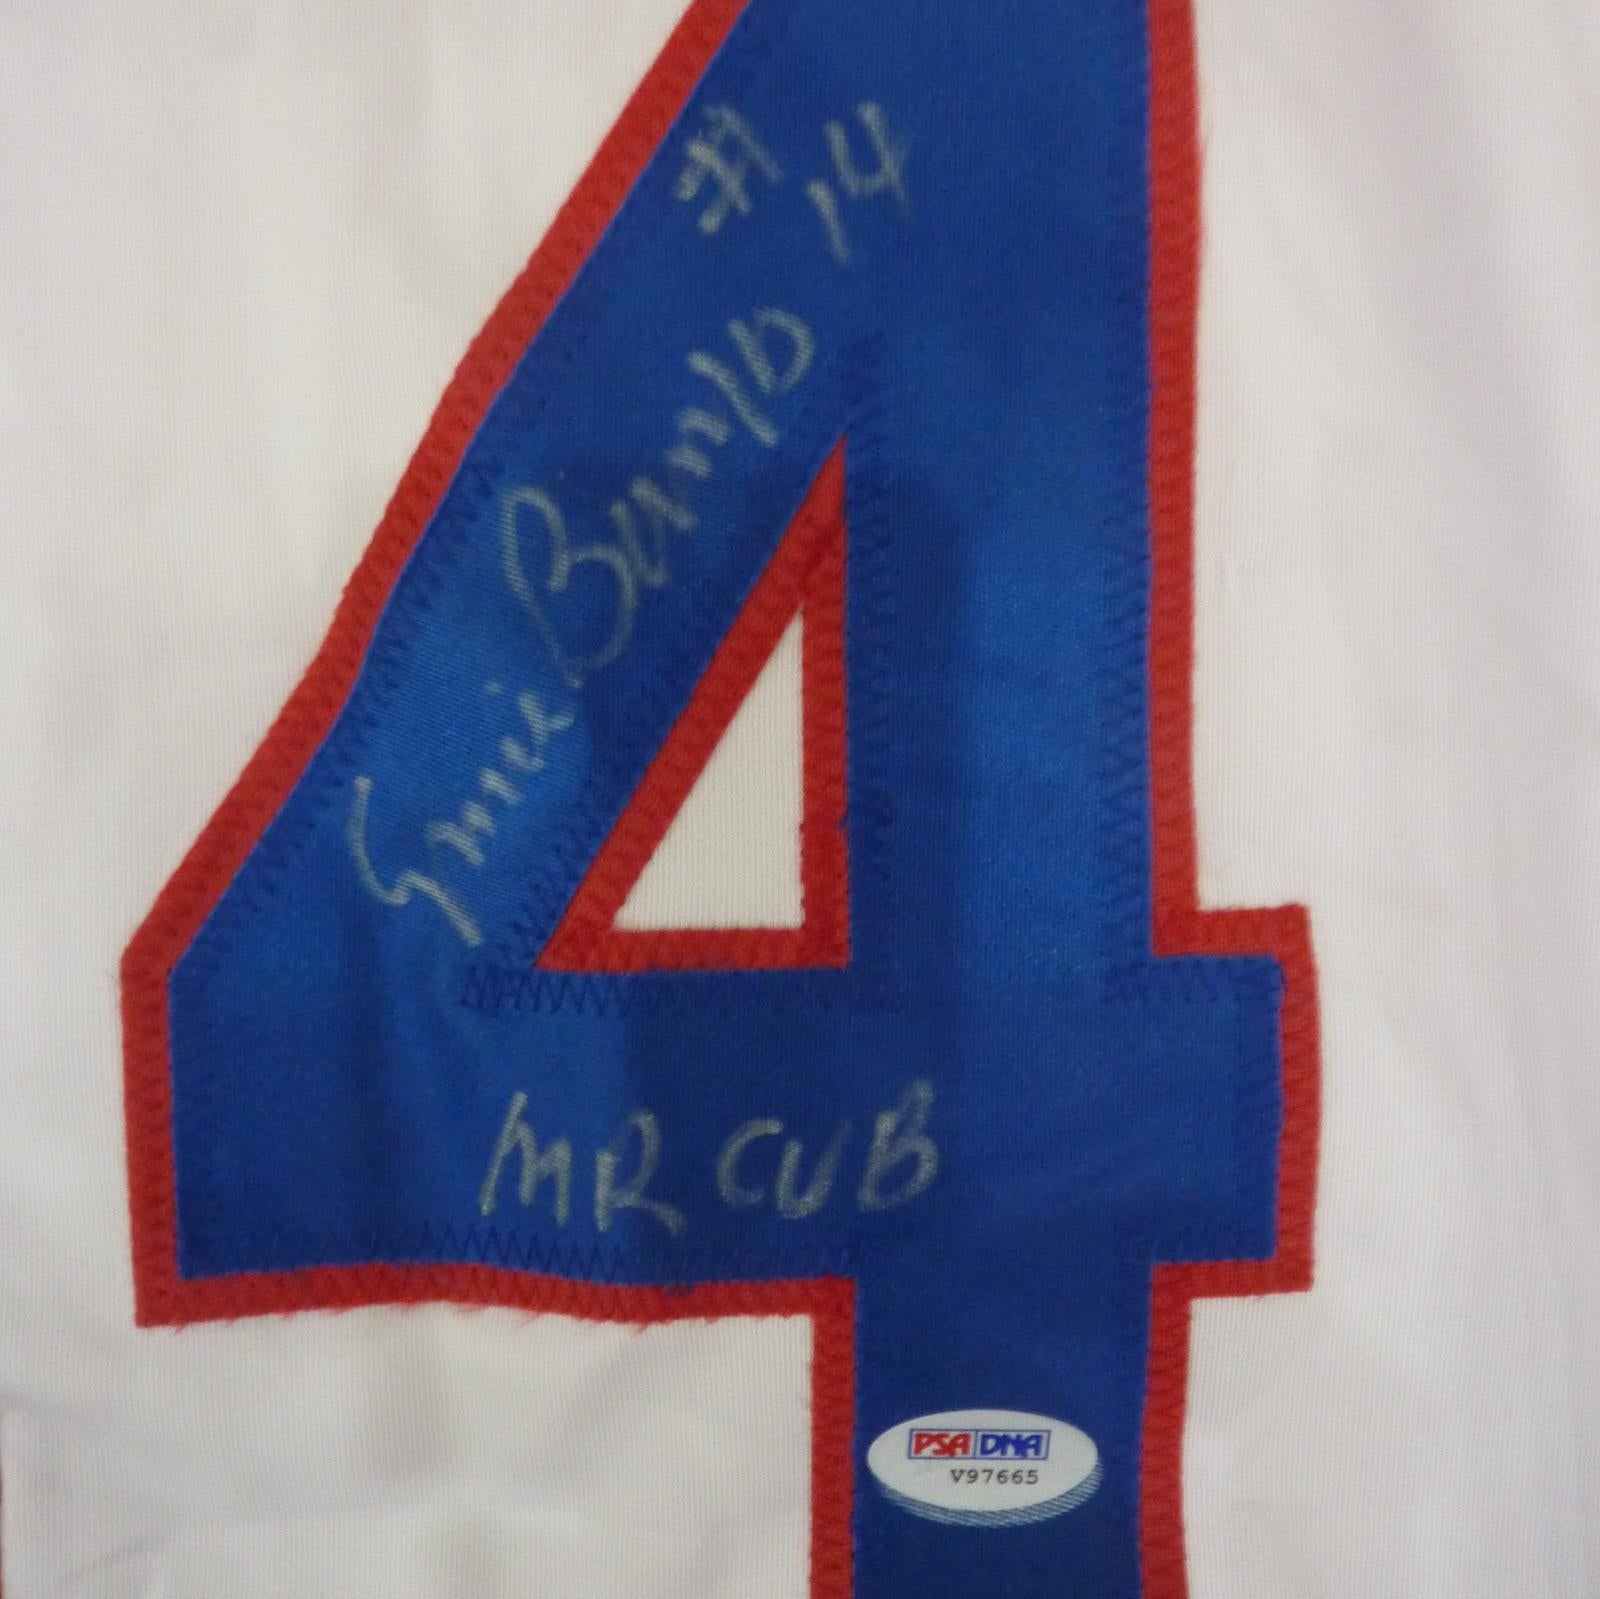 Ernie Banks #14, 1968 Chicago Cubs Jersey for Sale in Brooklyn